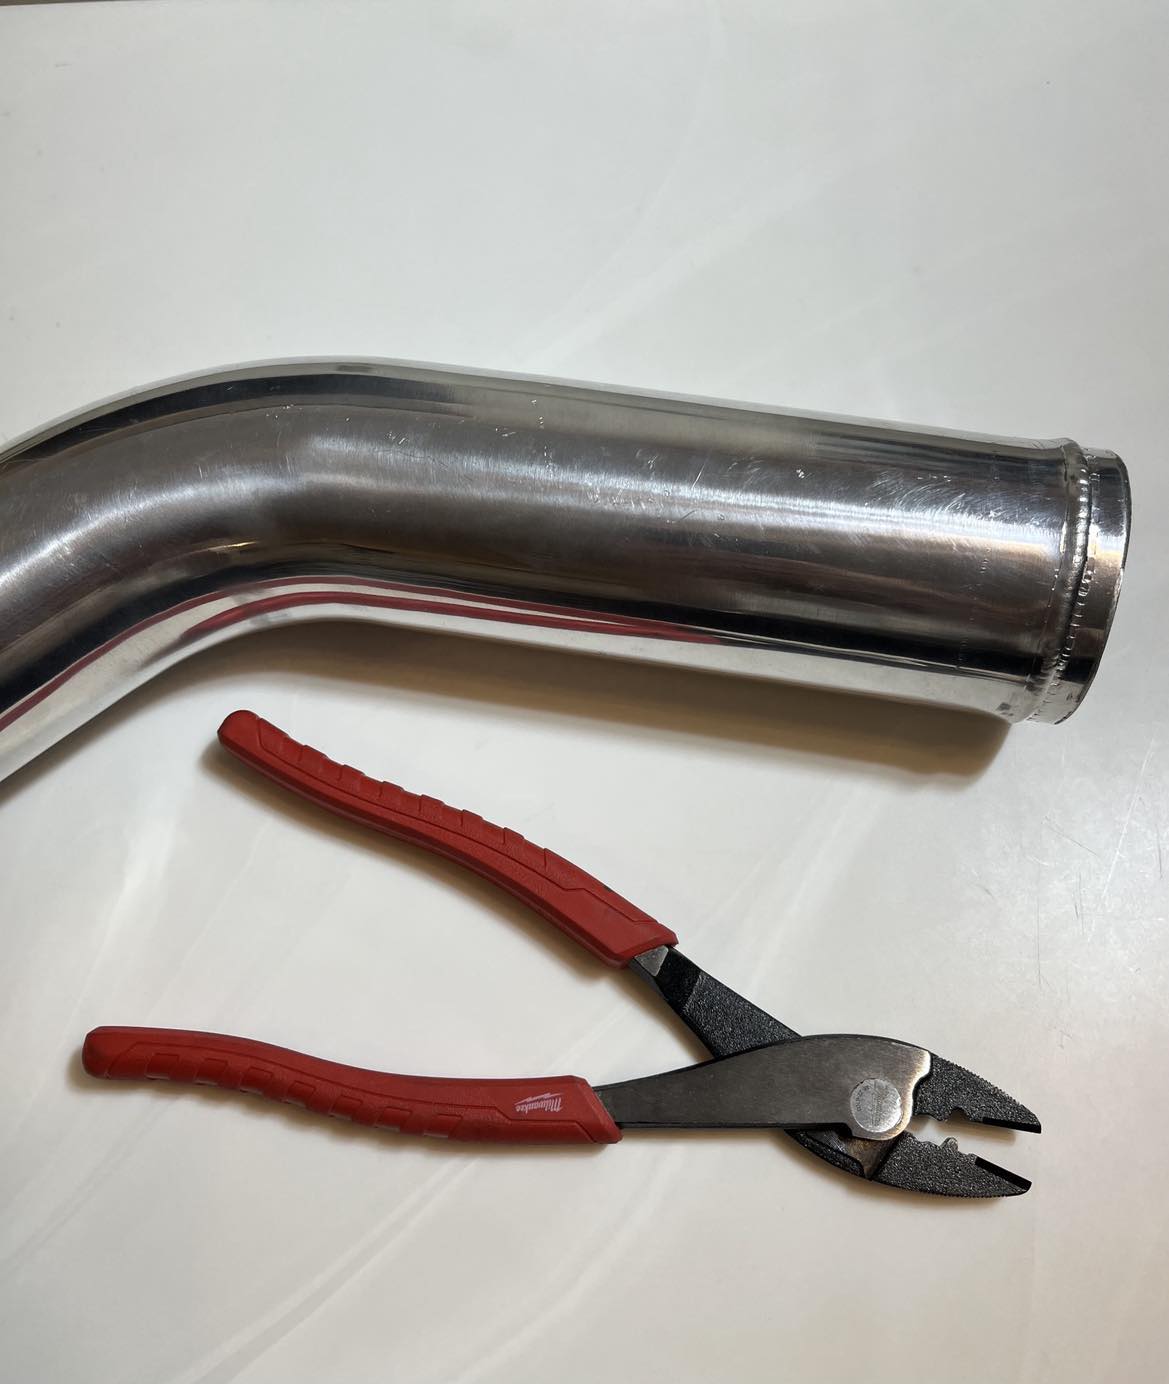 Tips and Tricks with Speed Science Part 1 - Rolled Edge for Intercooler Piping